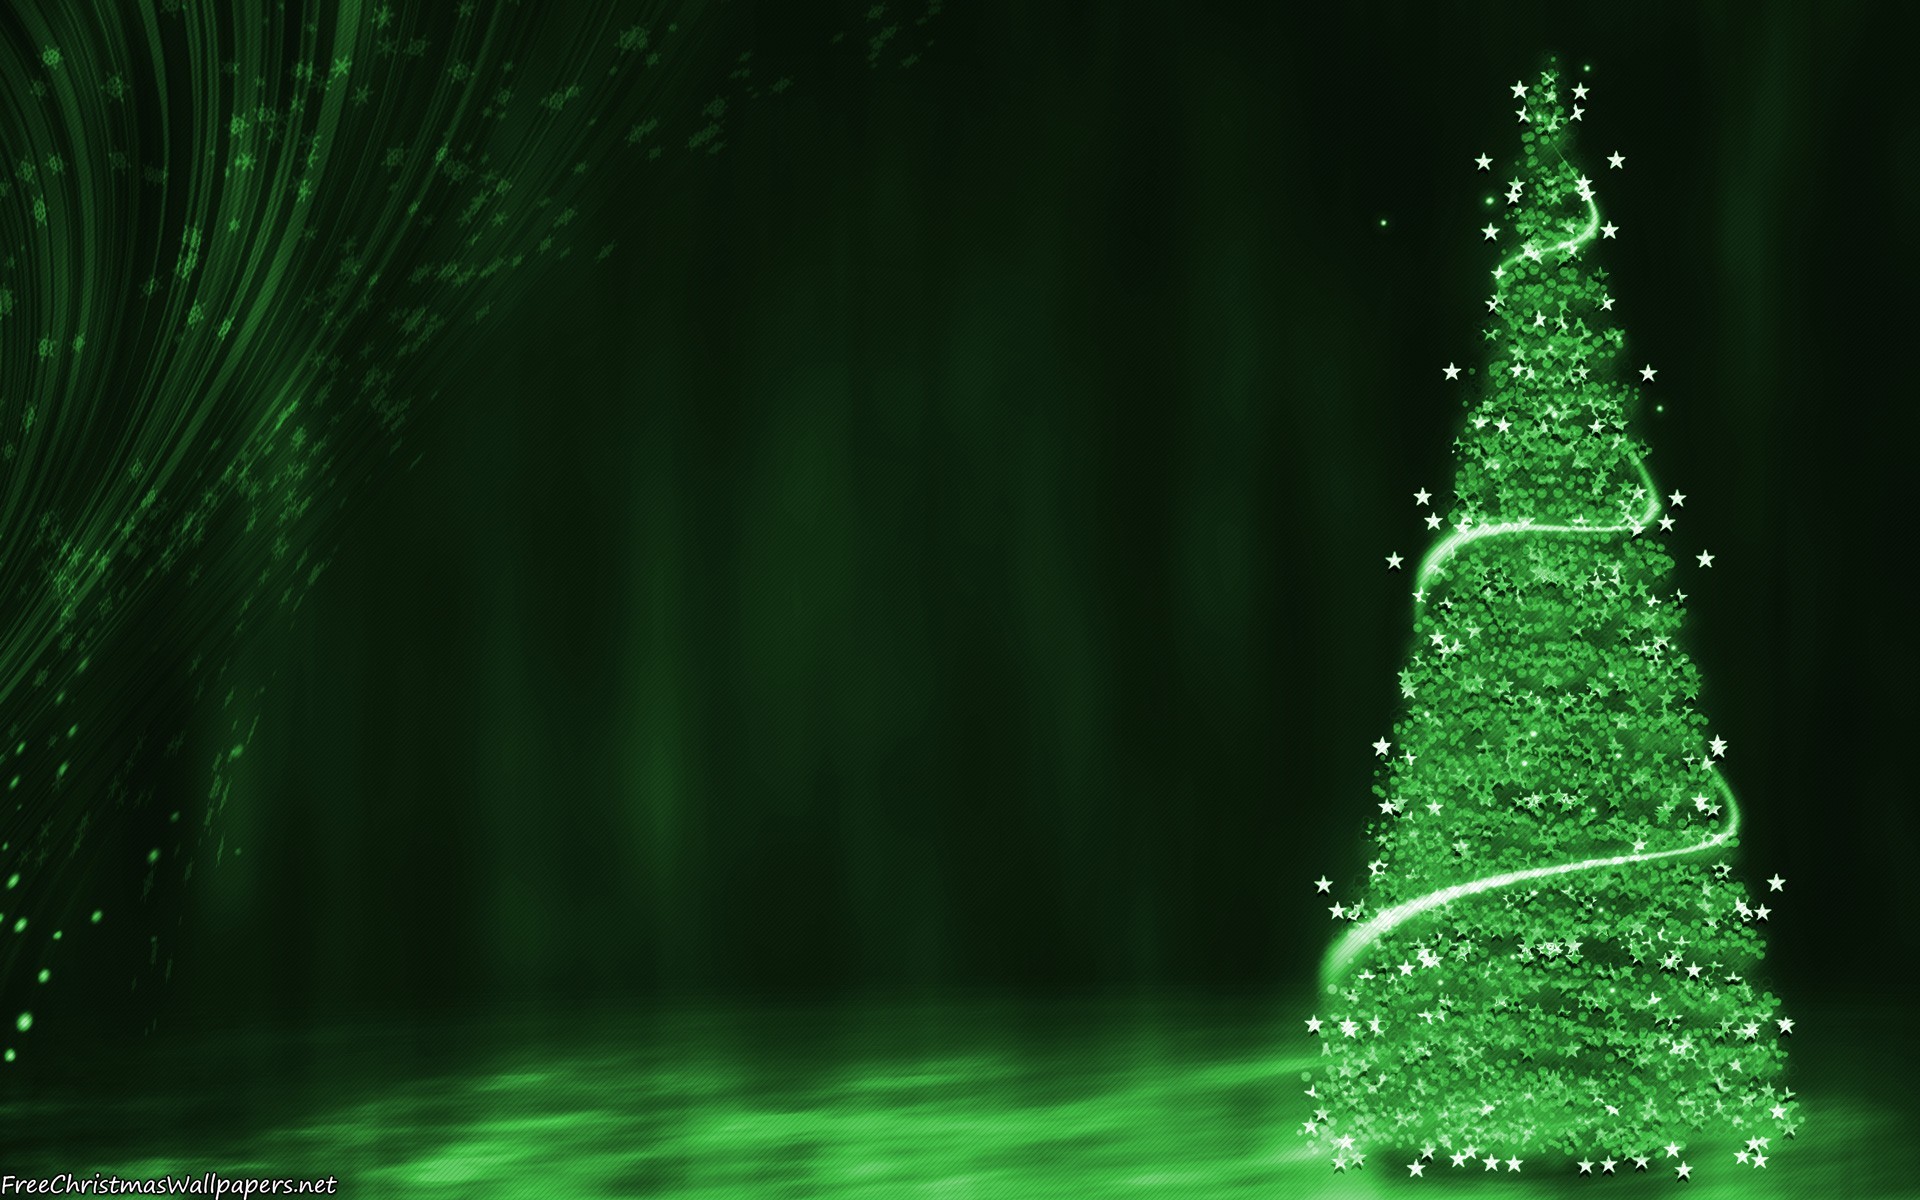 1920x1200 Green Christmas Background (10)